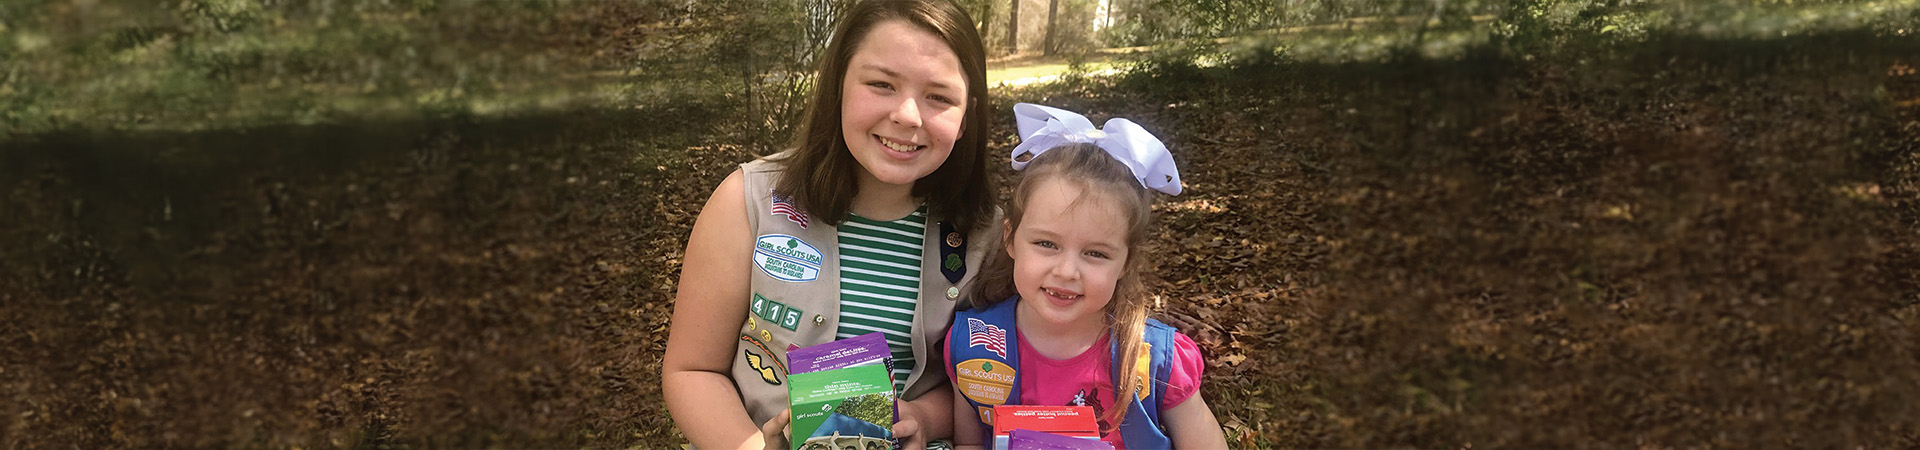  Two girl scouts smiling and holding cookie boxes. 